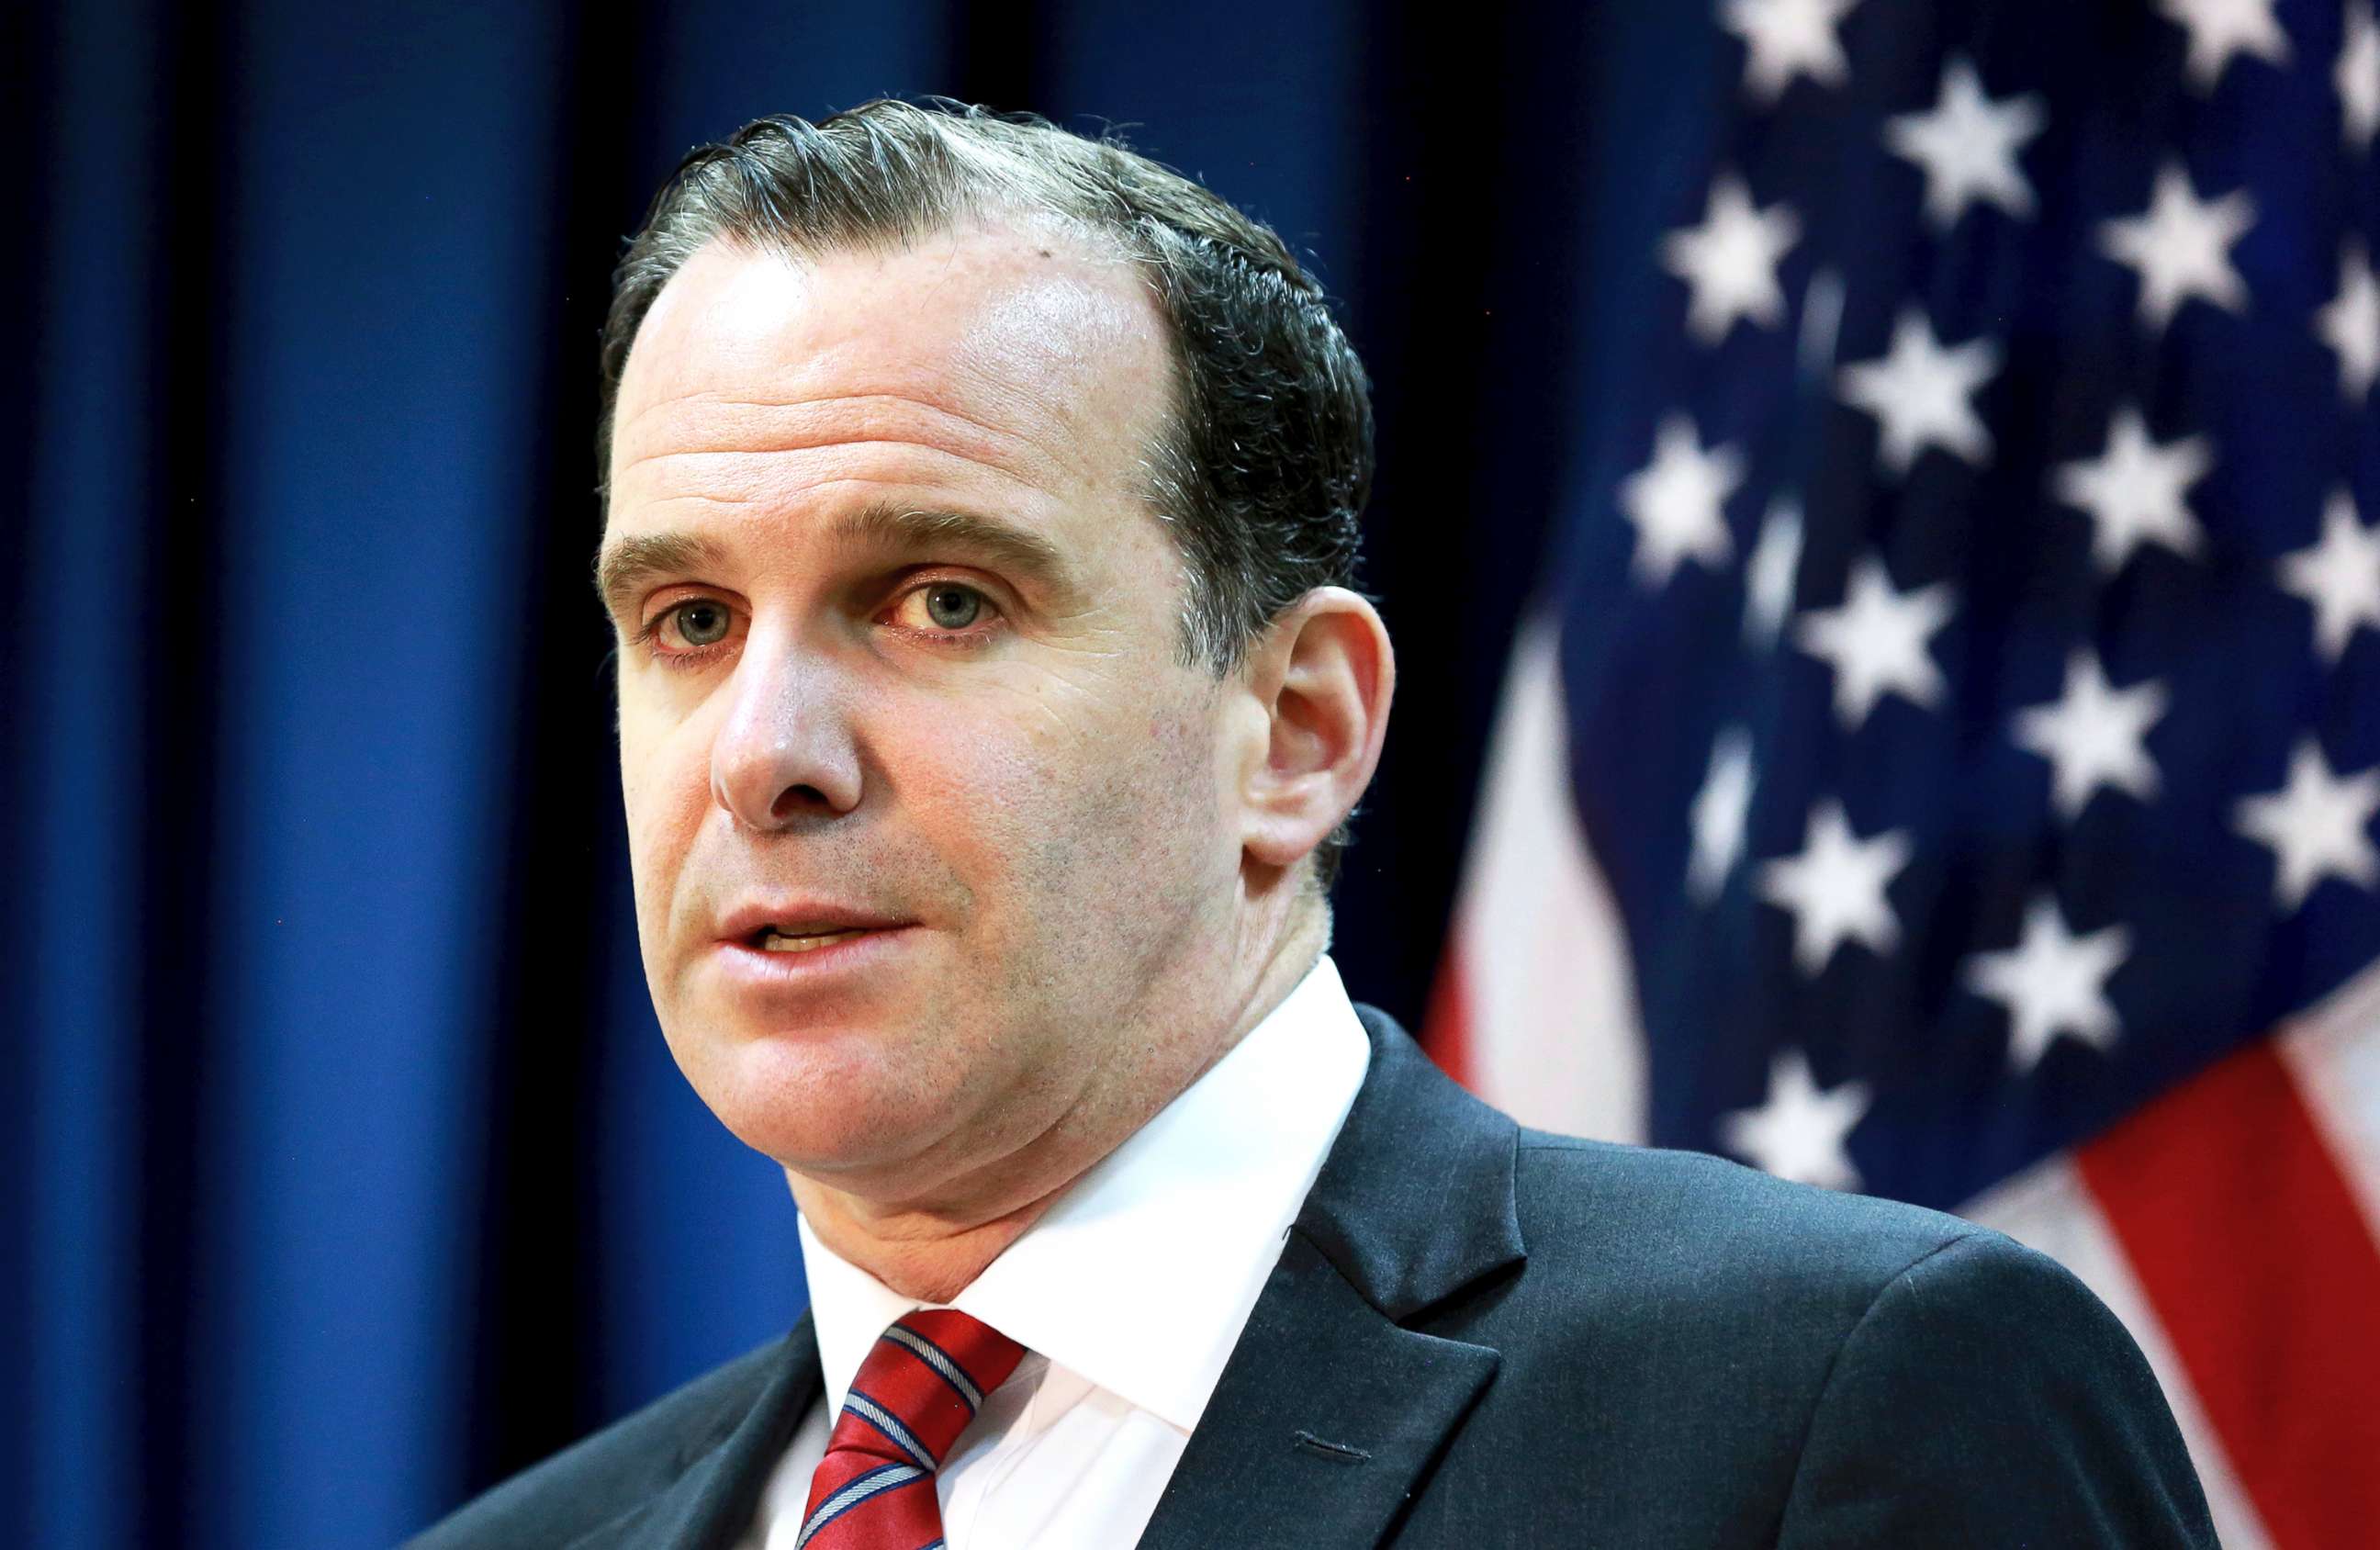 PHOTO: Brett McGurk, the U.S. envoy for the global coalition against ISIS, speaks during a news conference at the U.S. Embassy Baghdad, Iraq, June 7, 2017.